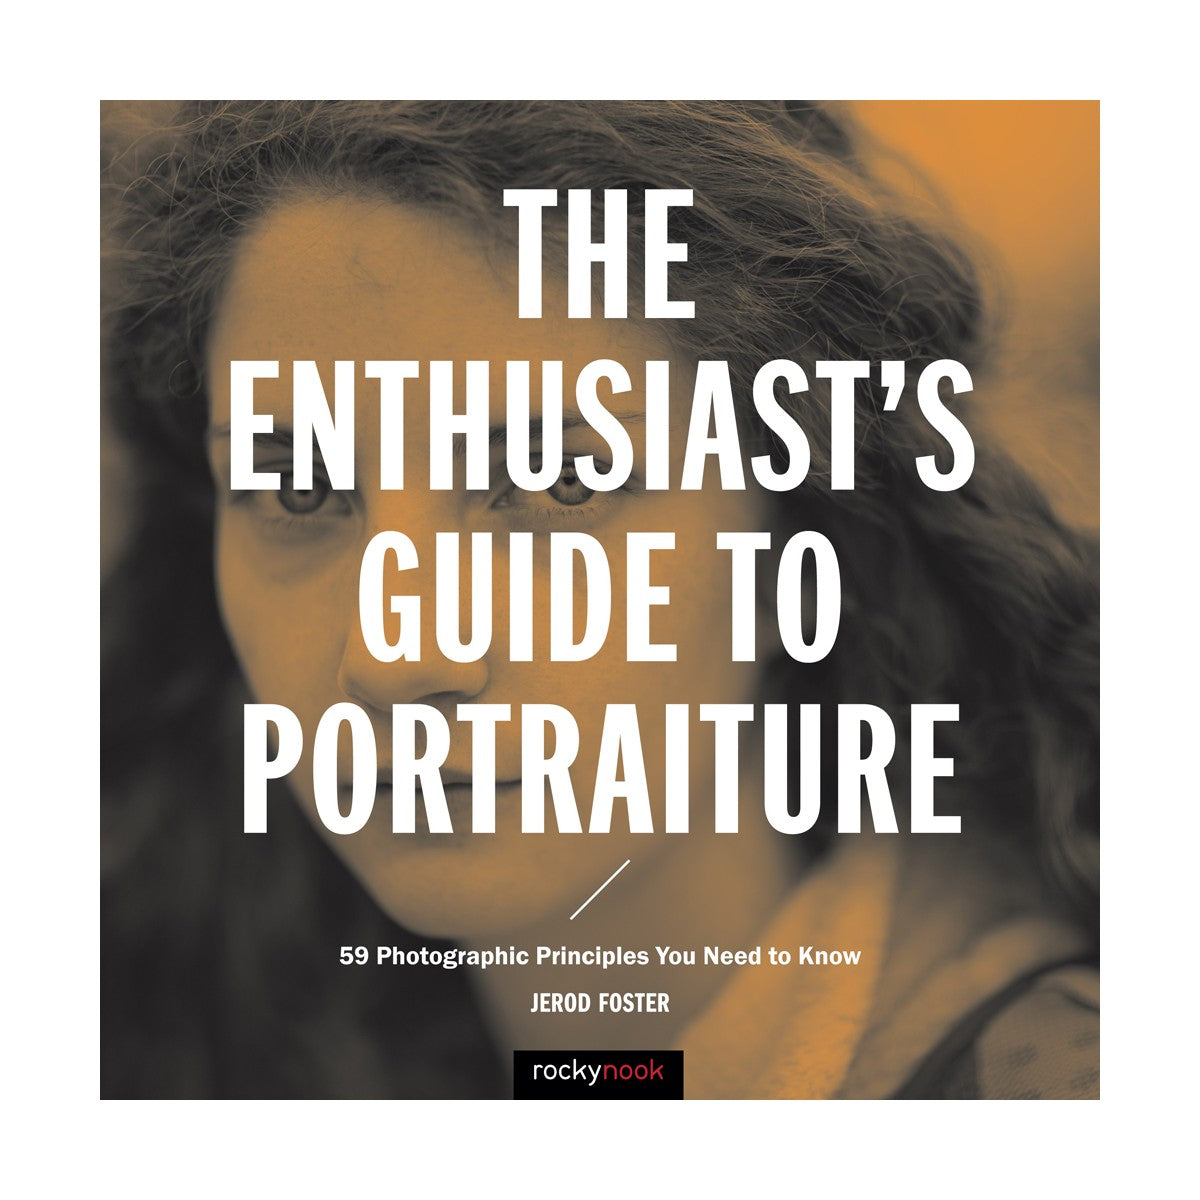 The Enthusiast's Guide to Portraiture Book